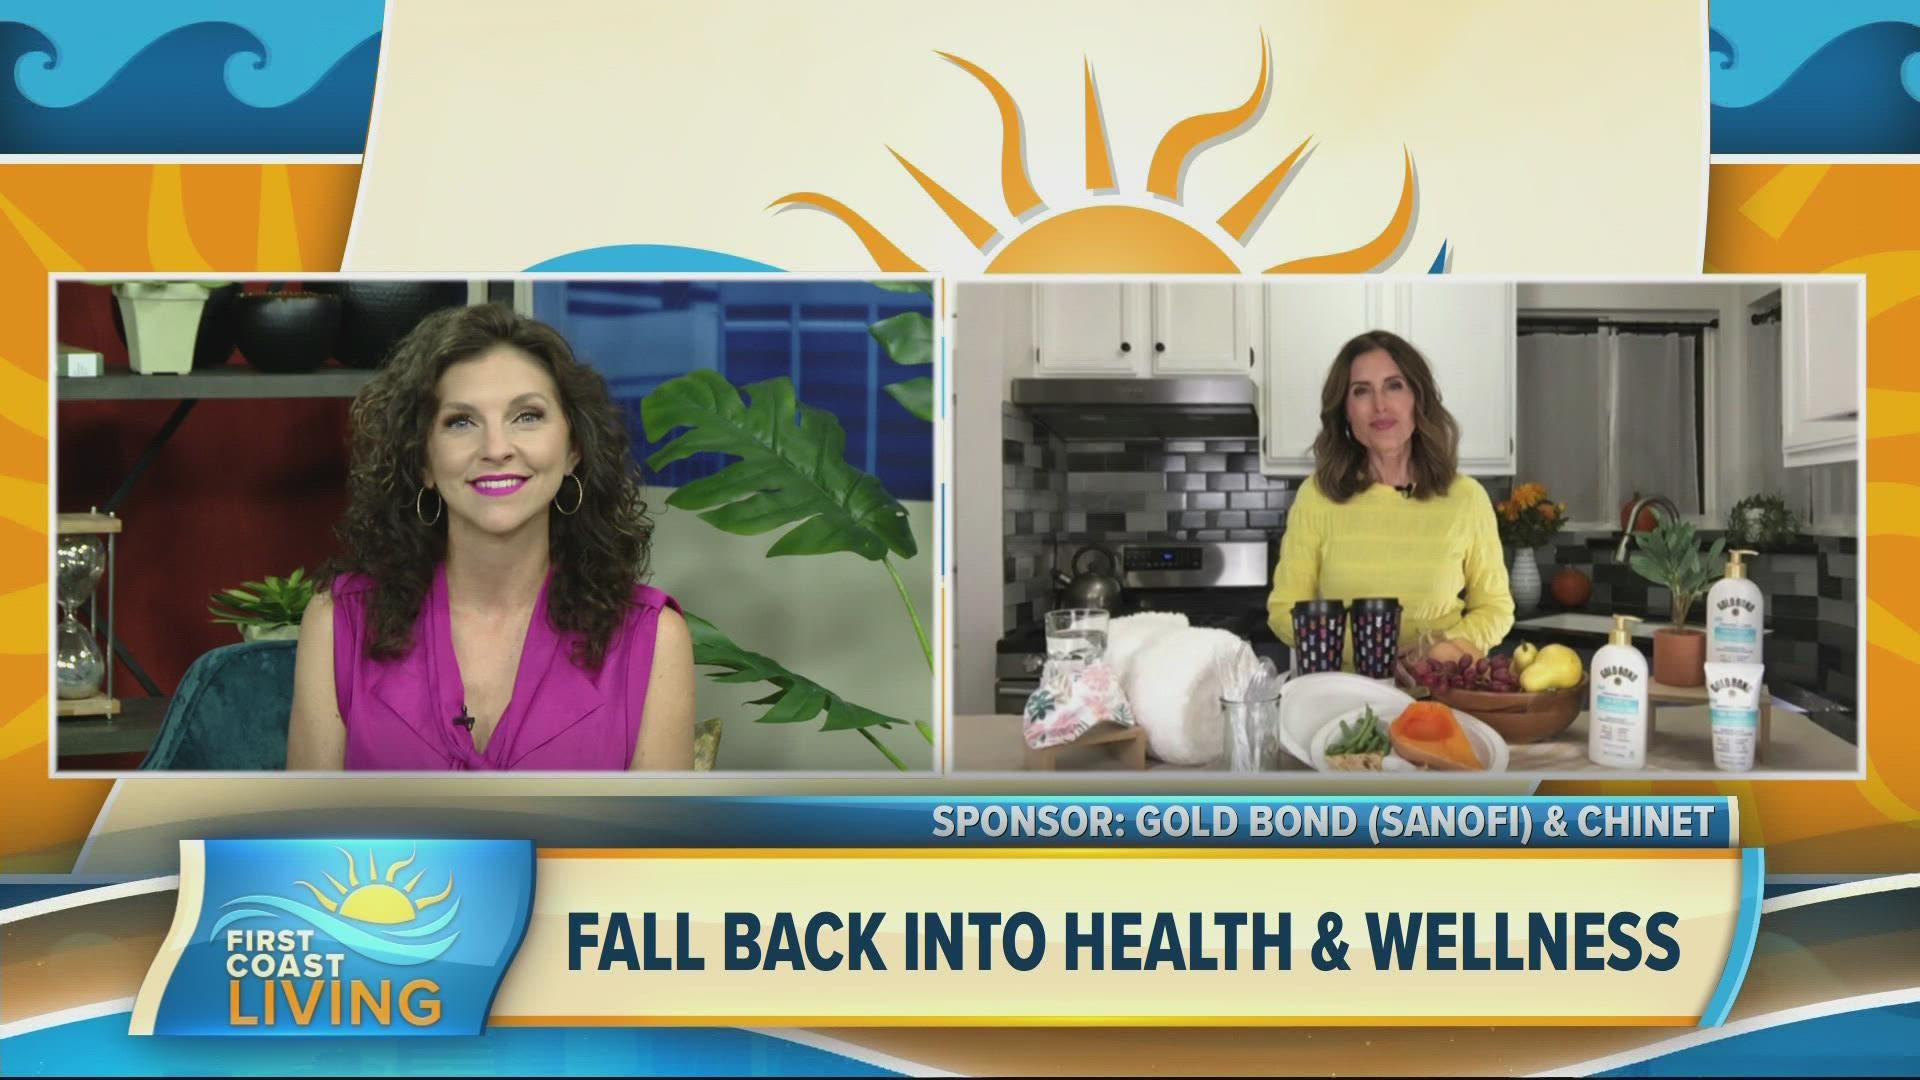 Editor in Chief of SimpleMomsGuide.com, Terra Wellington shares tips on starting the fall season with healthy habits.